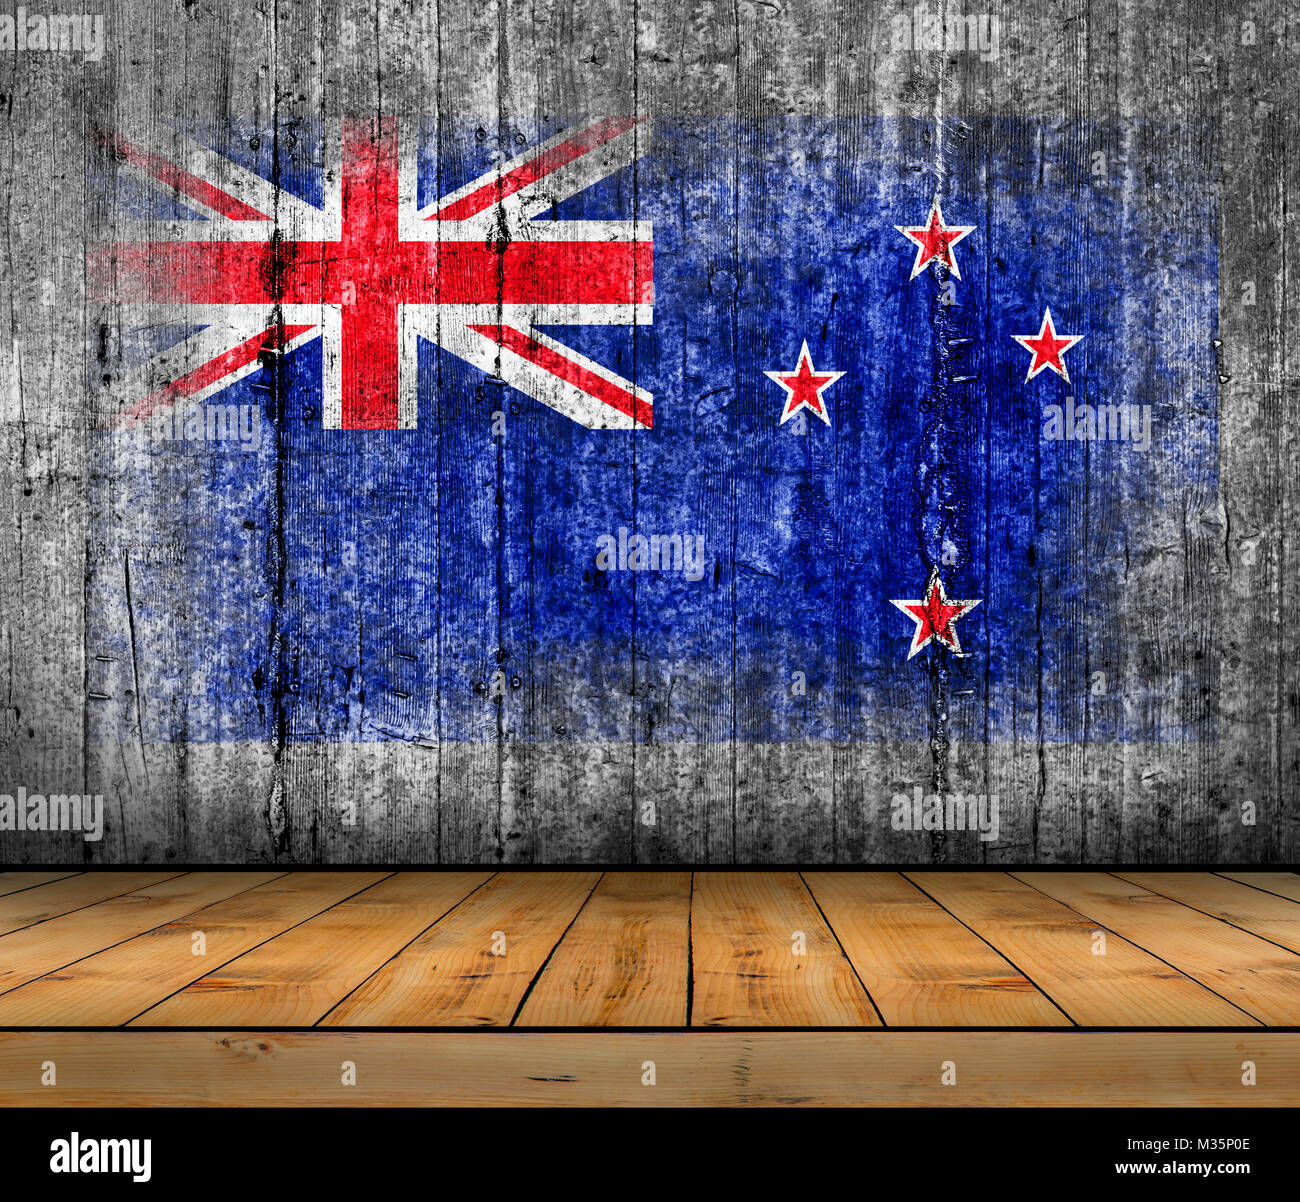 New zeland flag painted on background texture gray concrete with wooden floor Stock Photo